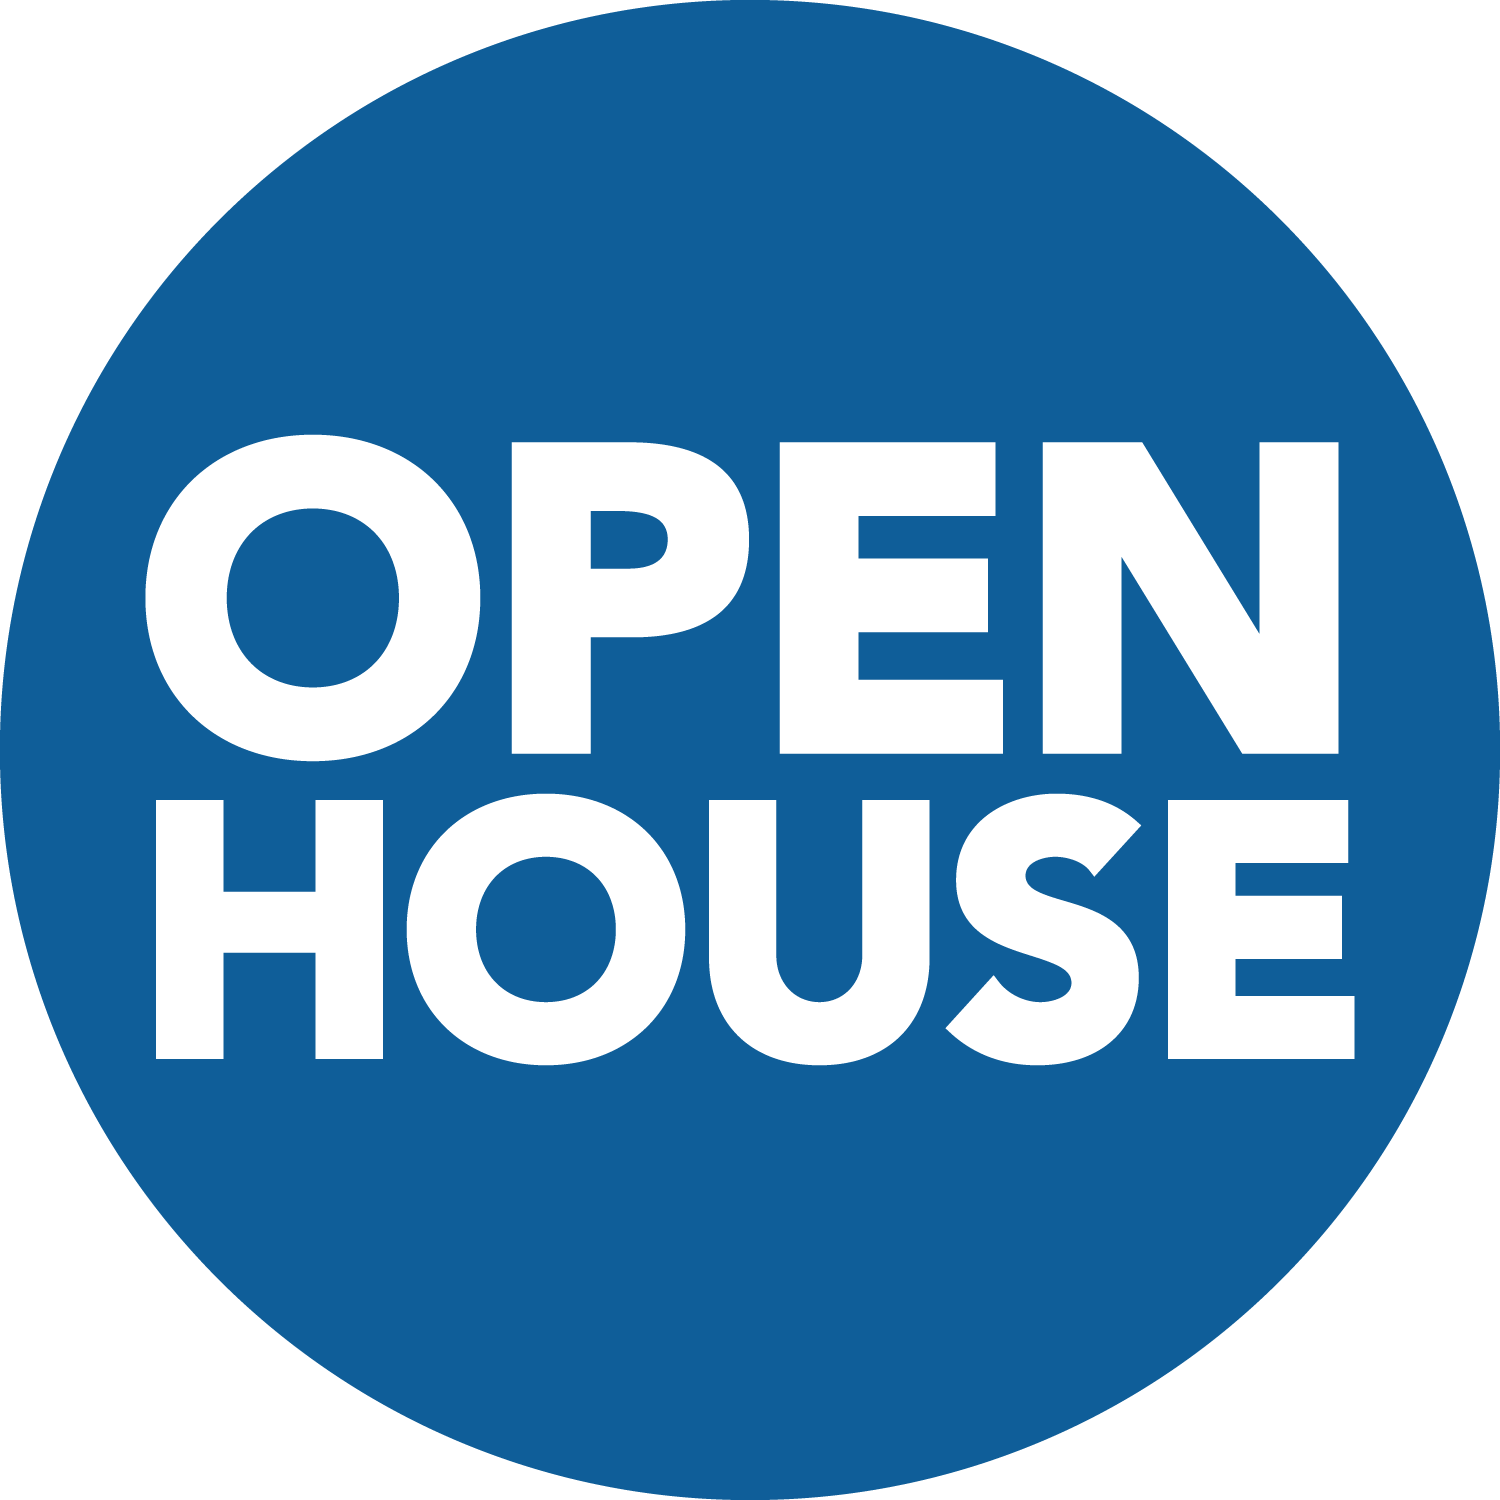 Fall Open House 2016 - Open House, Transparent background PNG HD thumbnail